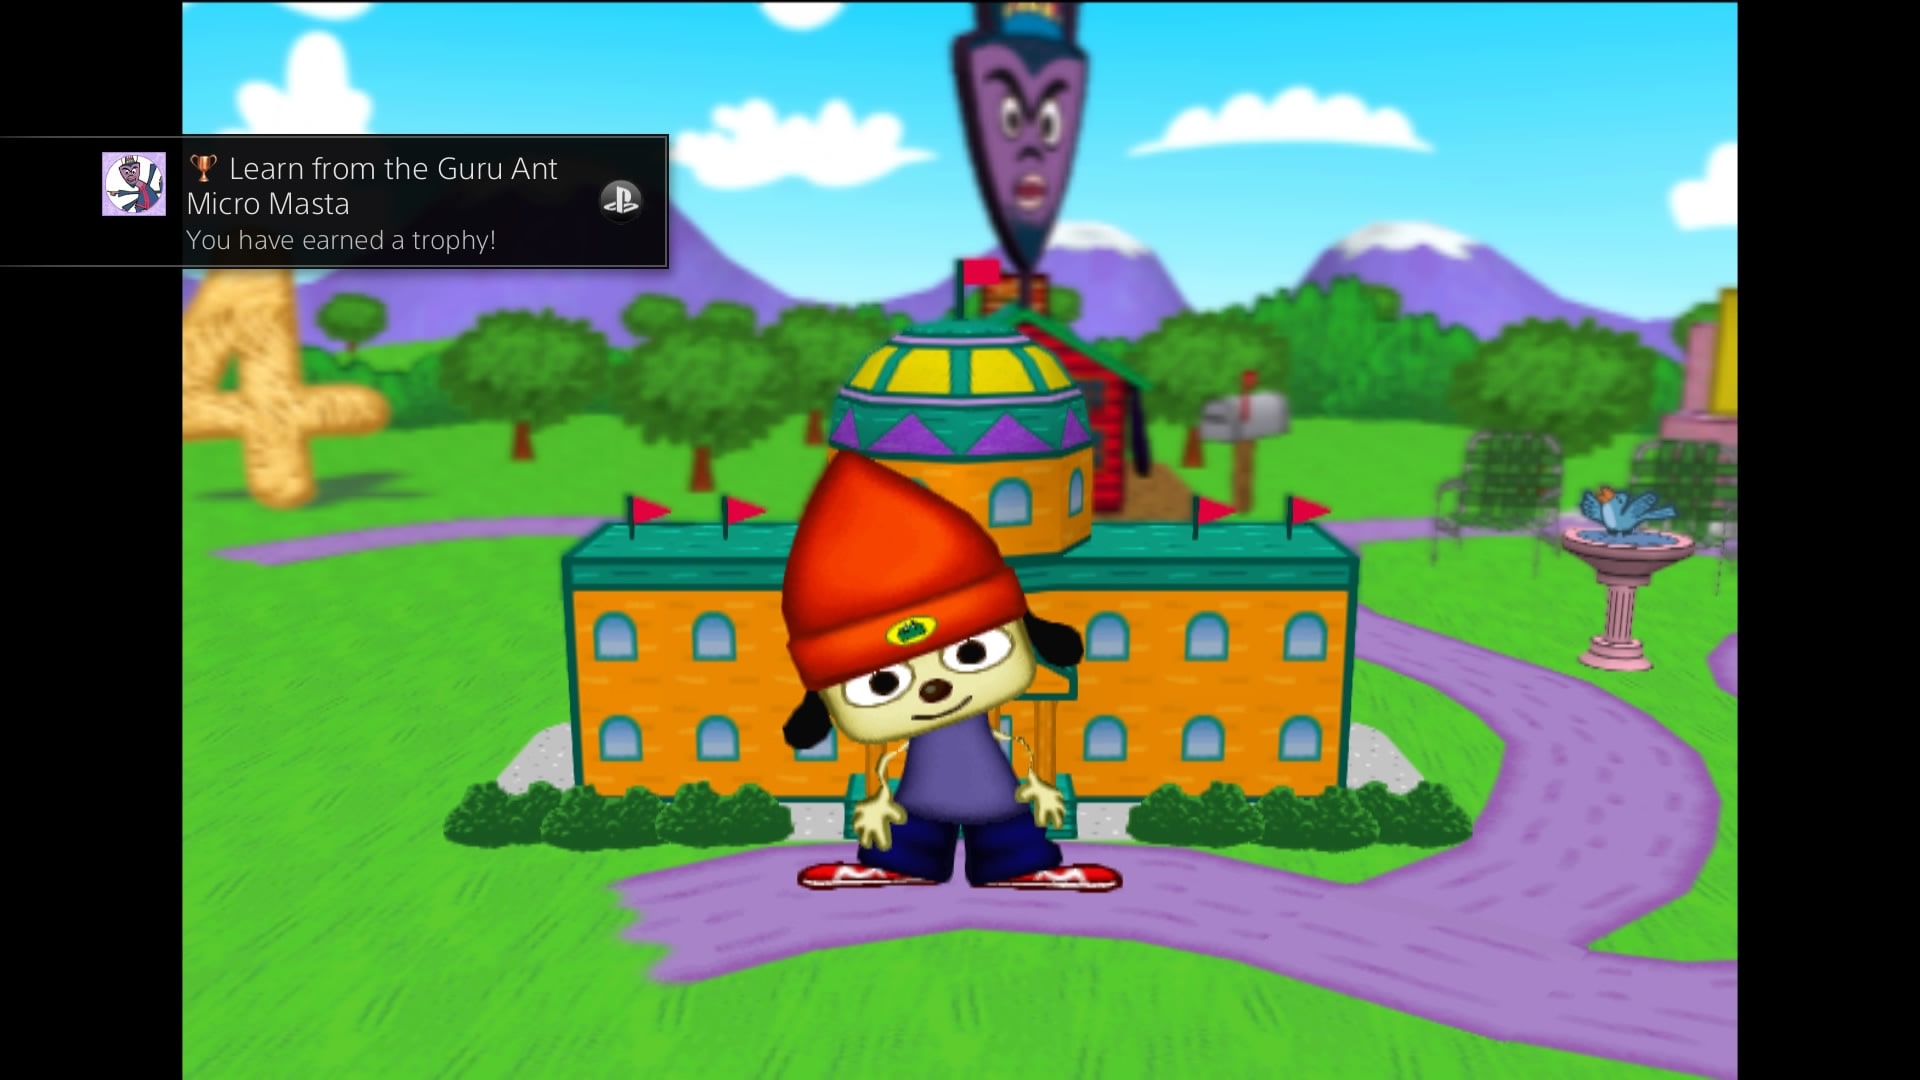 Could Parappa the Rapper return on Playstation Vita?